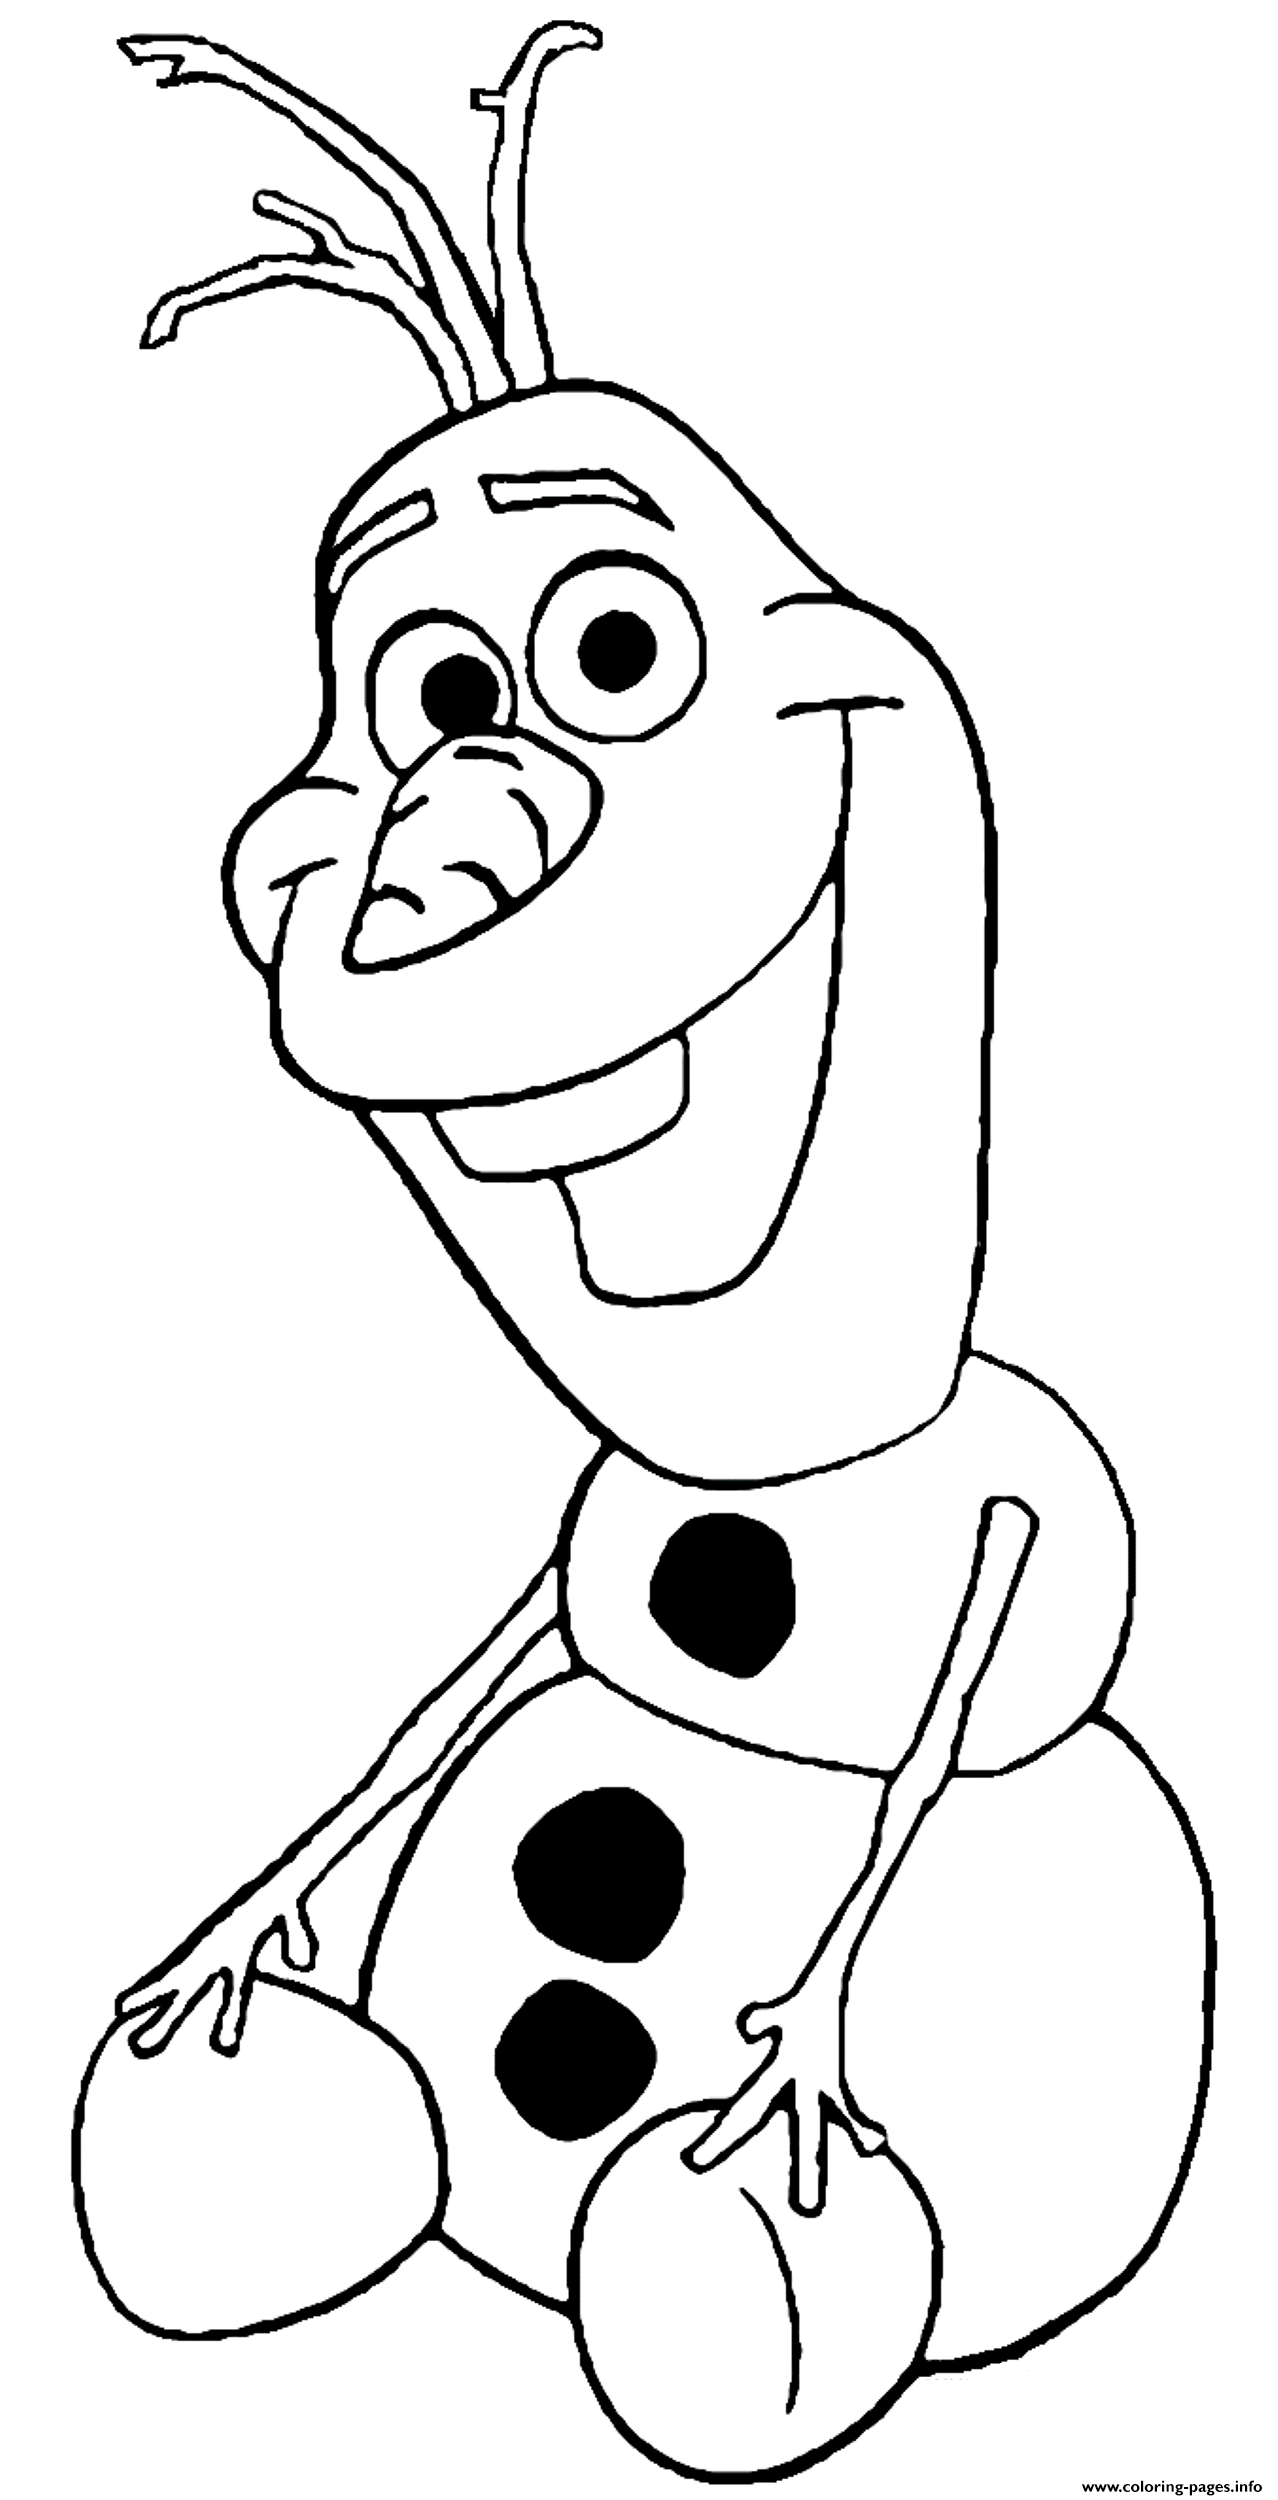 olaf pictures to print frozens olaf coloring pages best coloring pages for kids print olaf pictures to 